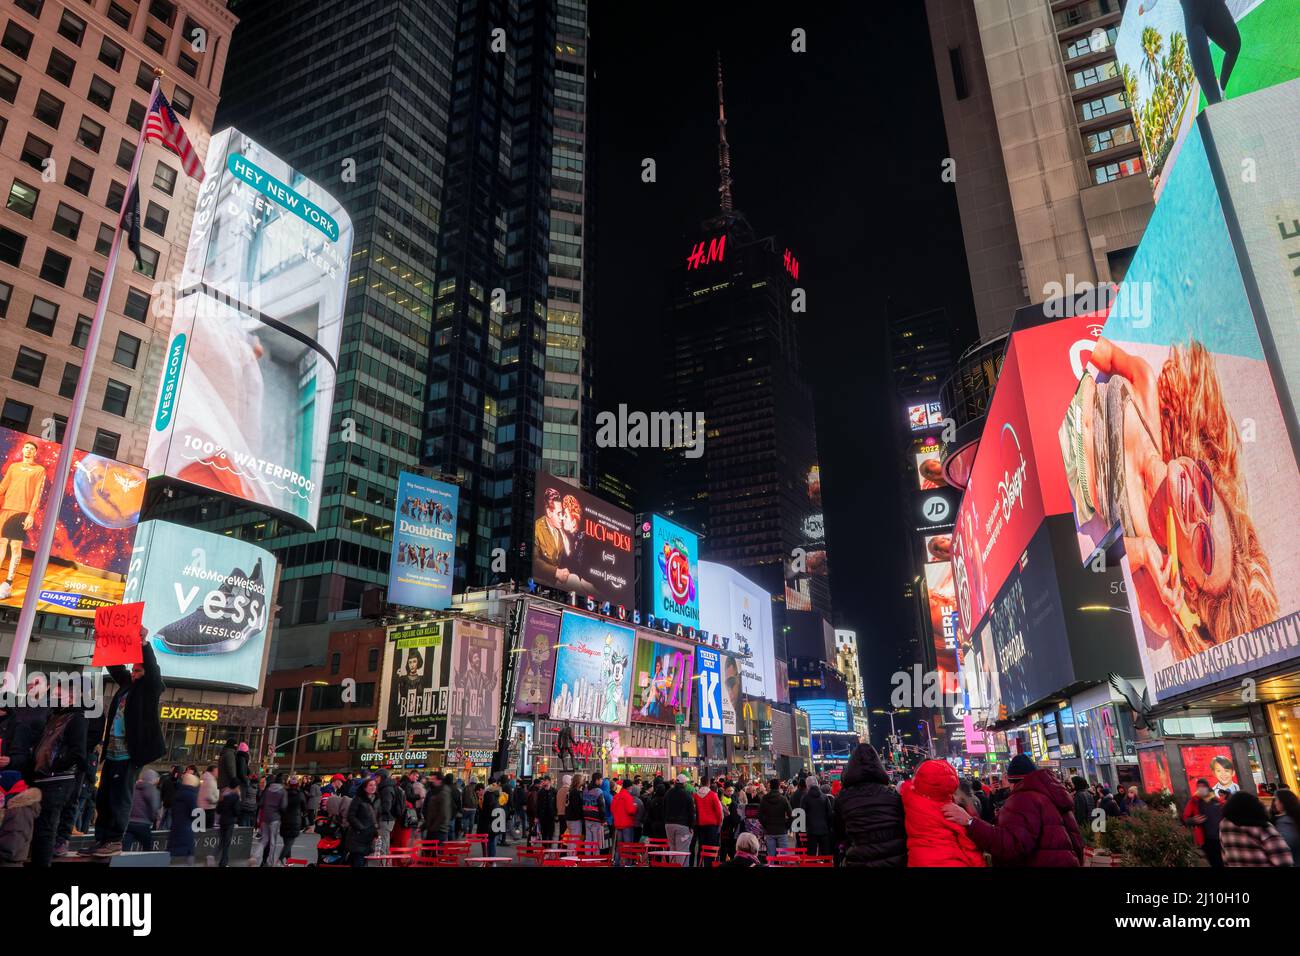 The Times Square at Night, New York City, USA Stockfoto